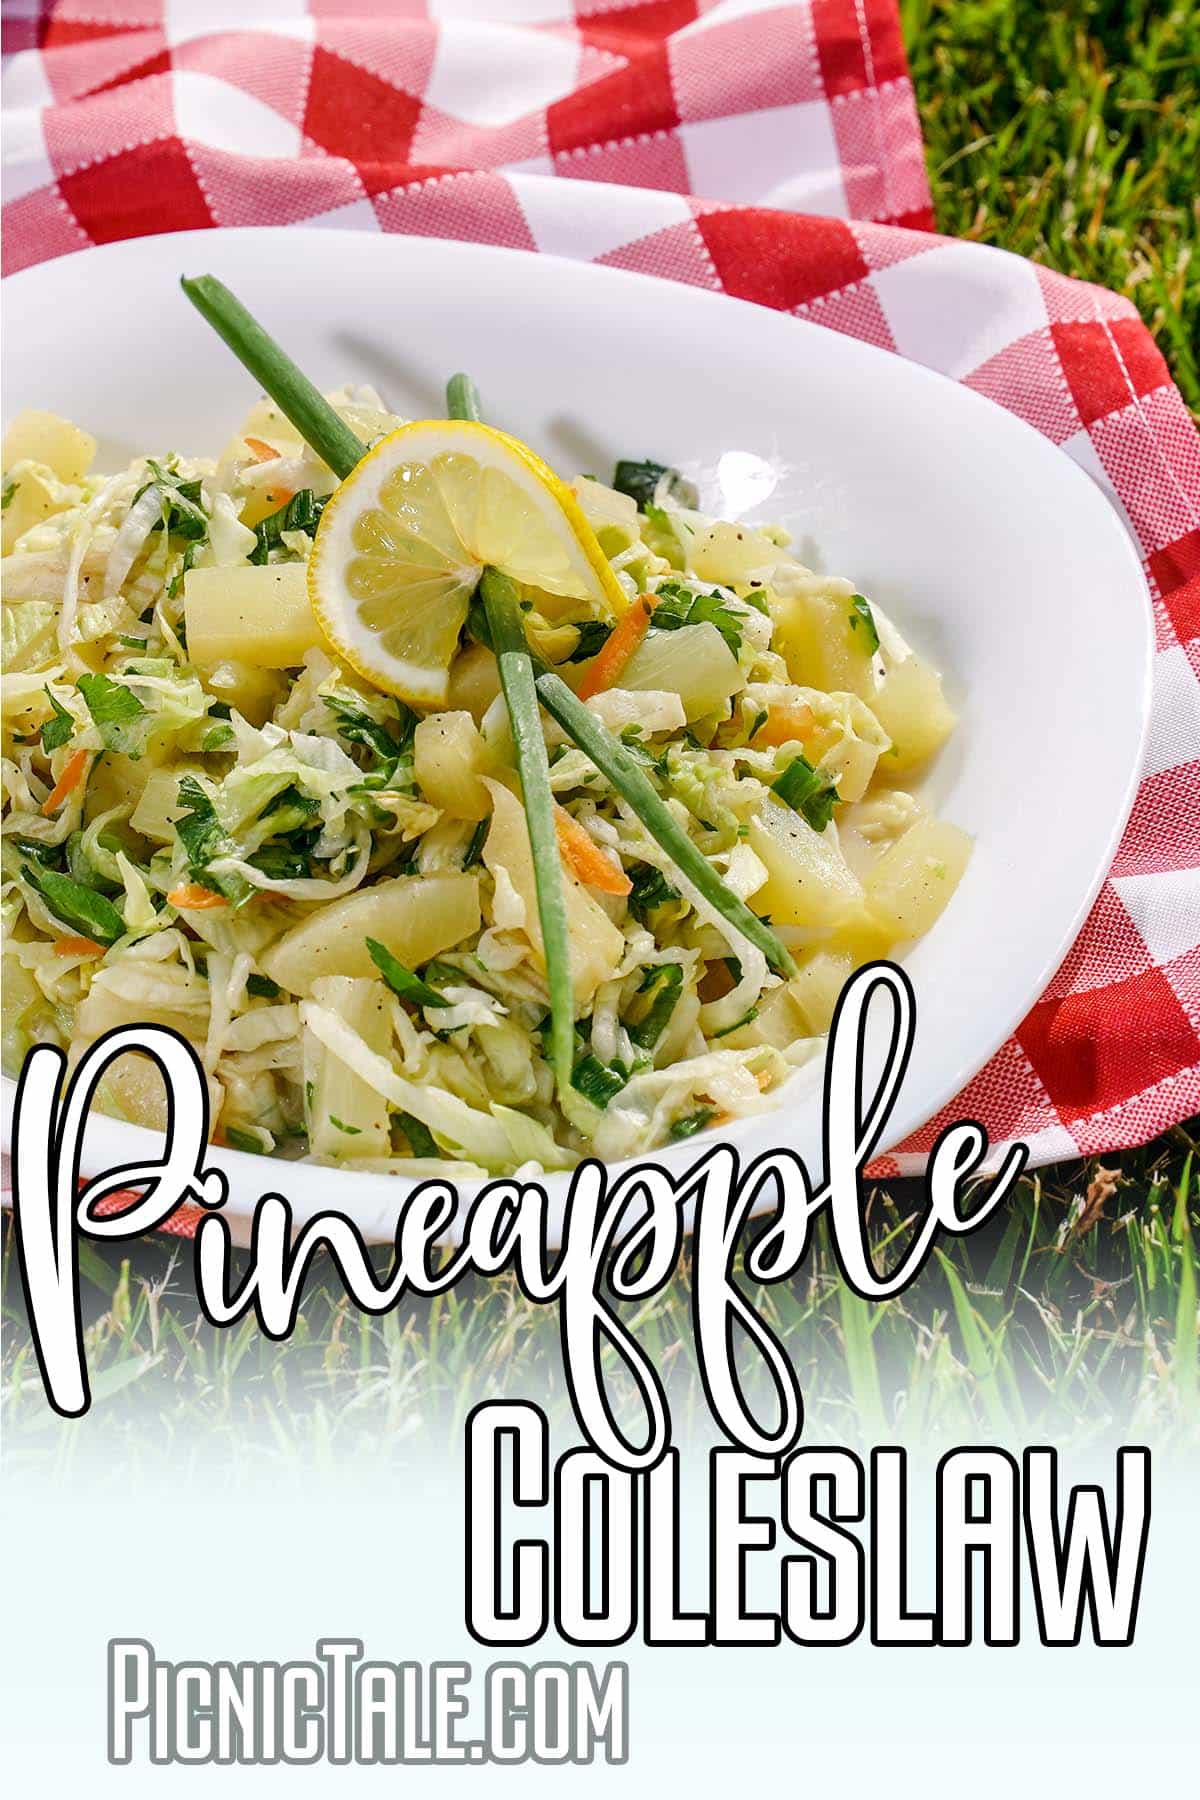 coleslaw made with pineapple with text which reads Pineapple Coleslaw